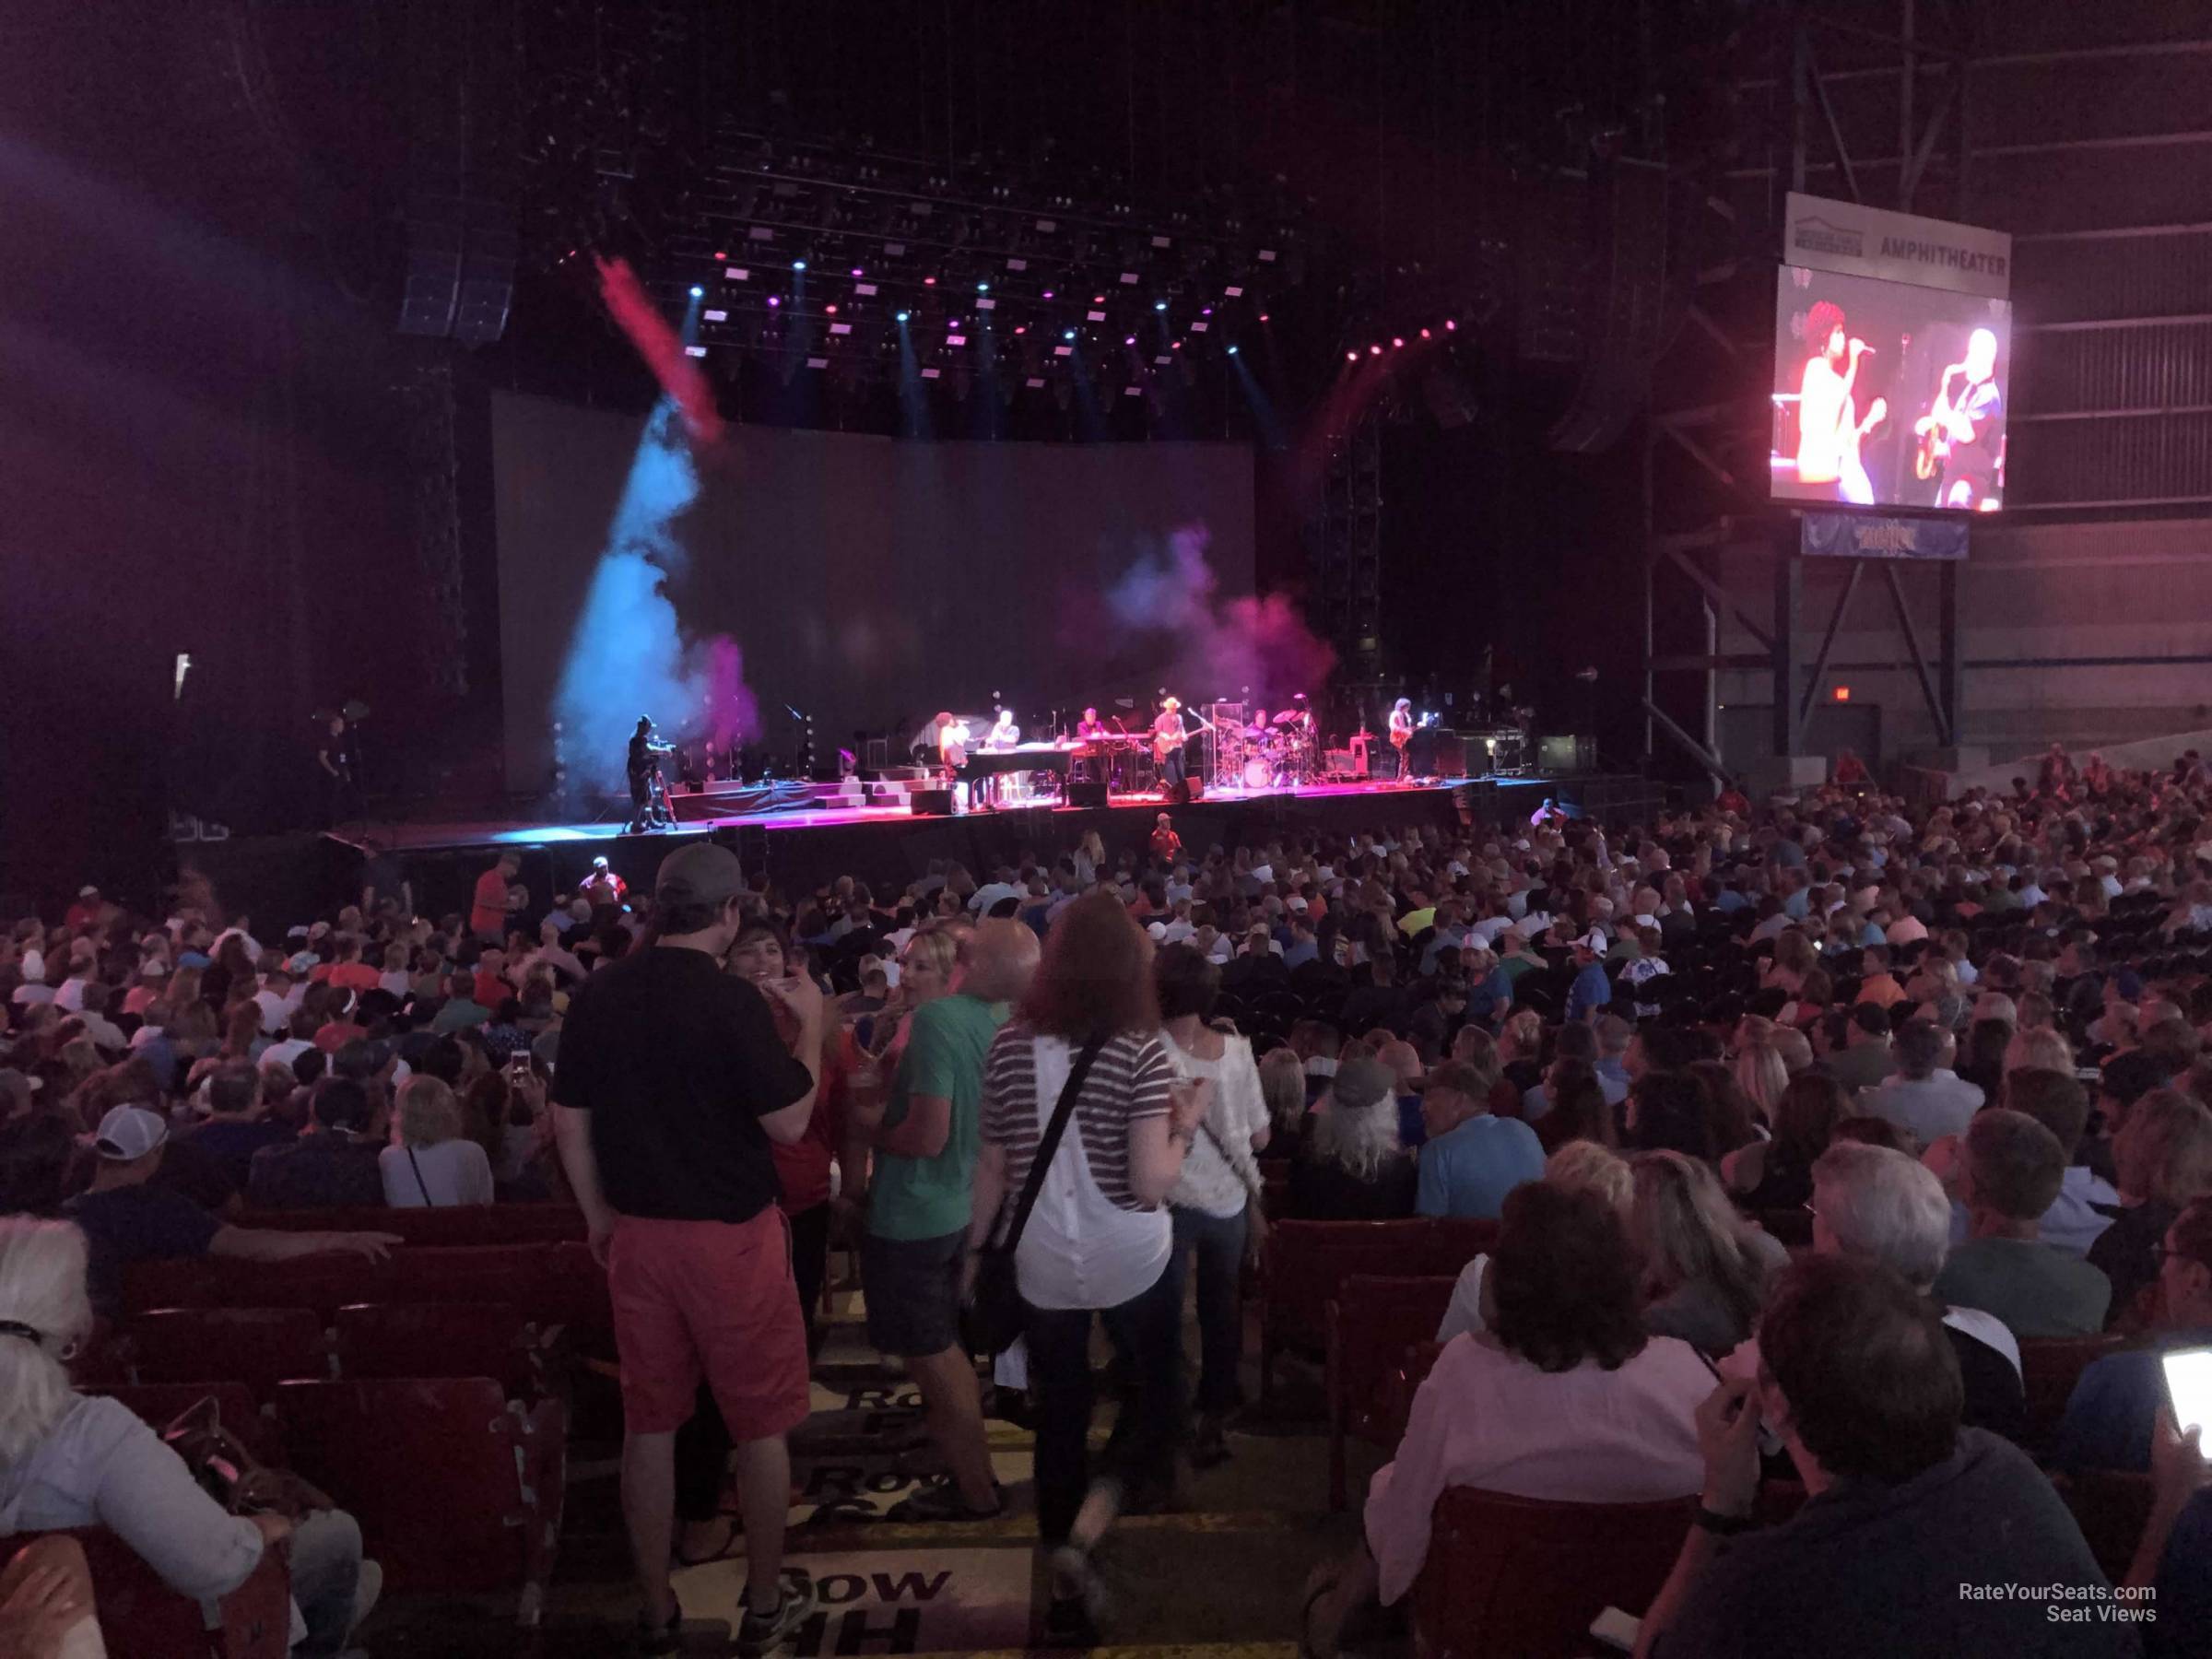 section 104, row jj seat view  - american family insurance amphitheater